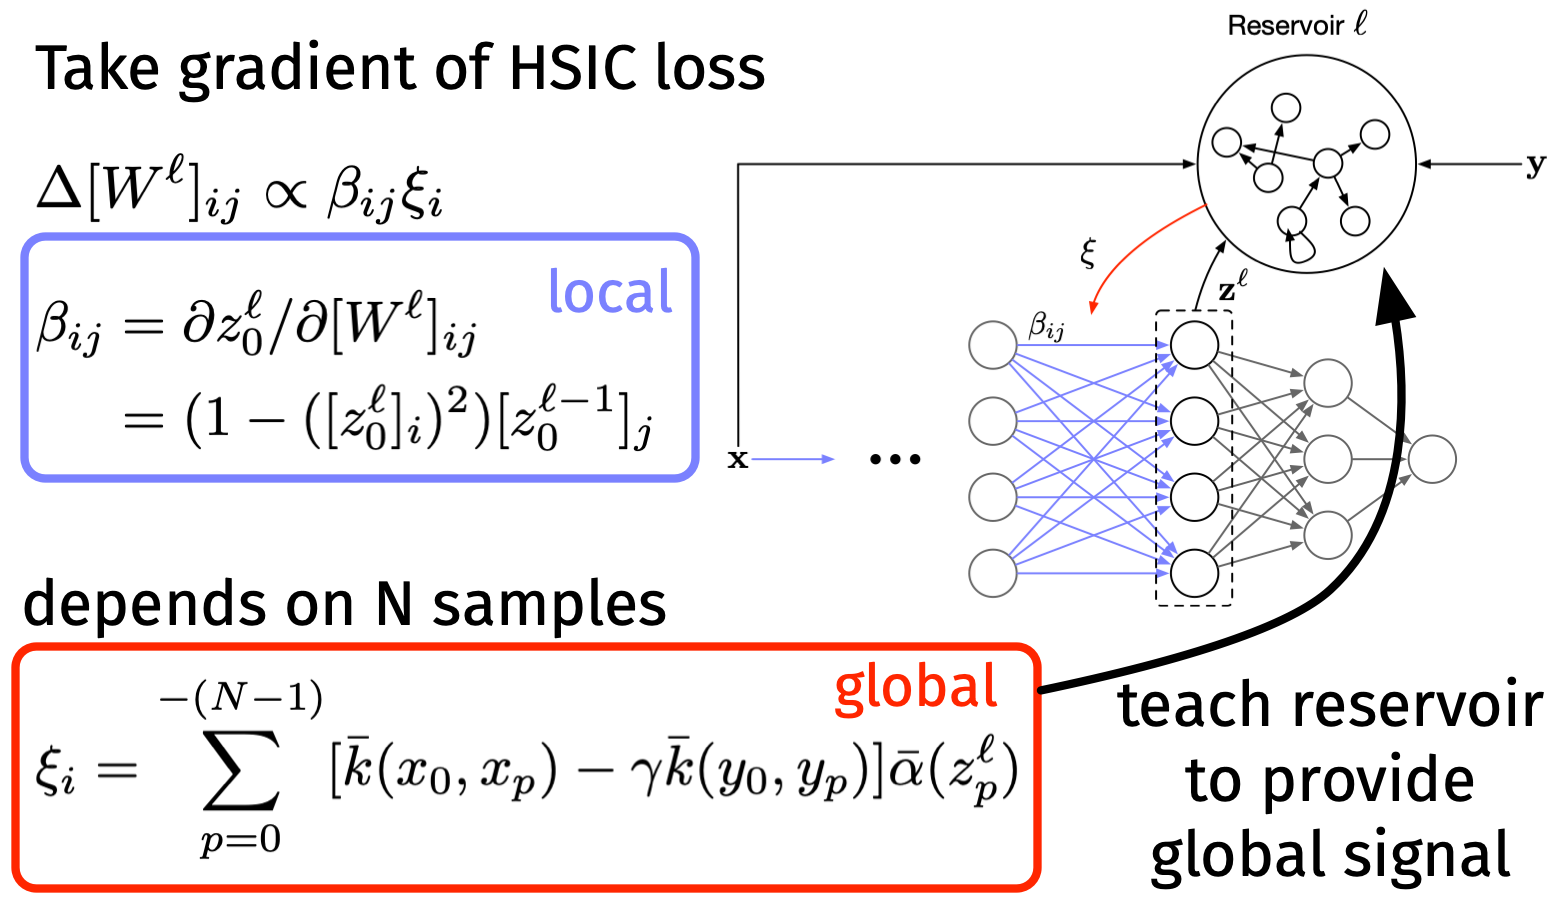 Our learning rule is a [three-factor Hebbian rule](http://journal.frontiersin.org/Article/10.3389/fncir.2015.00085/abstract). It contains a local component that depends on the current sample, and a global component that depends on past samples. A reservoir is used to compute the global component.